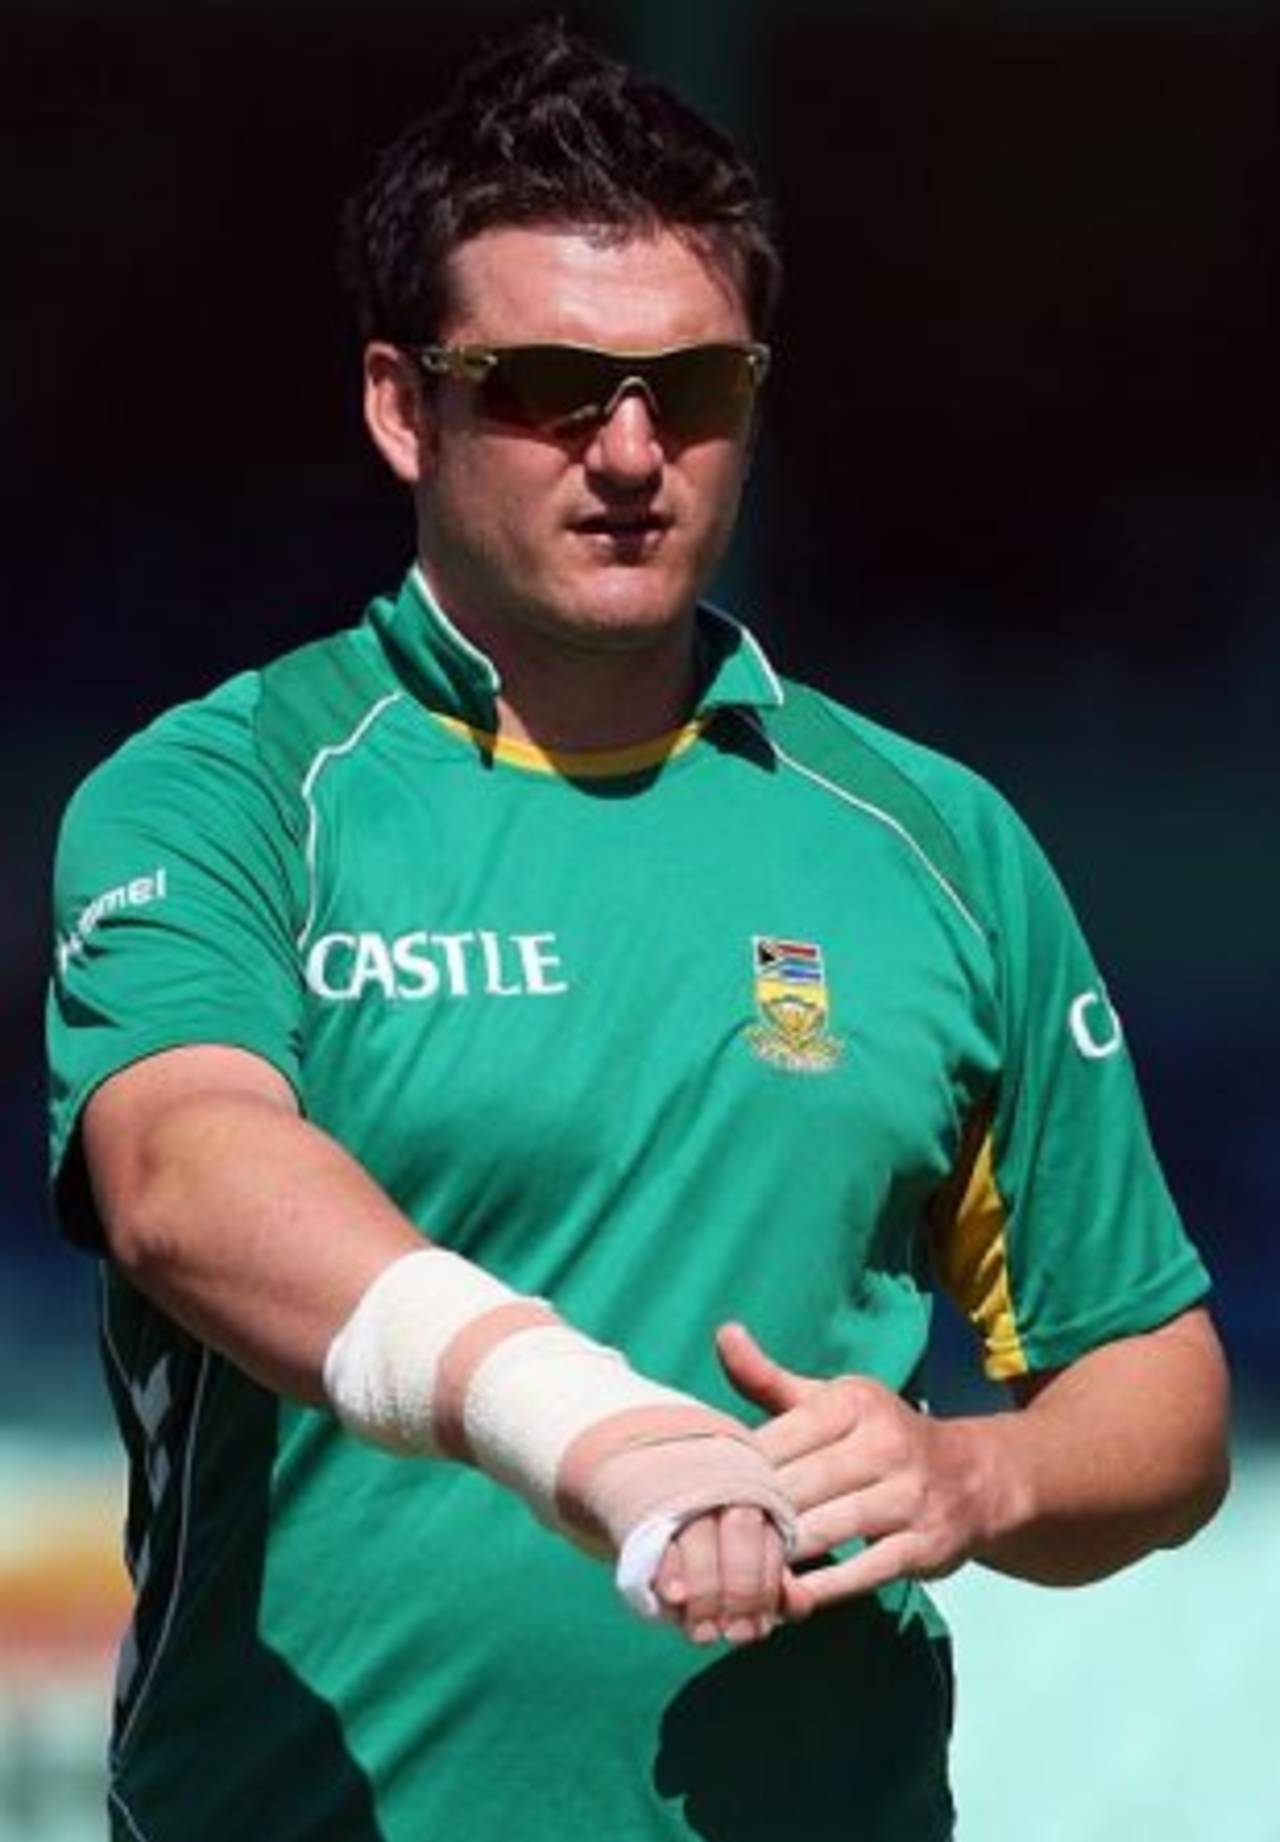 Graeme Smith with a broken hand, South Africa v Australia, 2nd Test, Durban, 3rd day, March 8, 2009